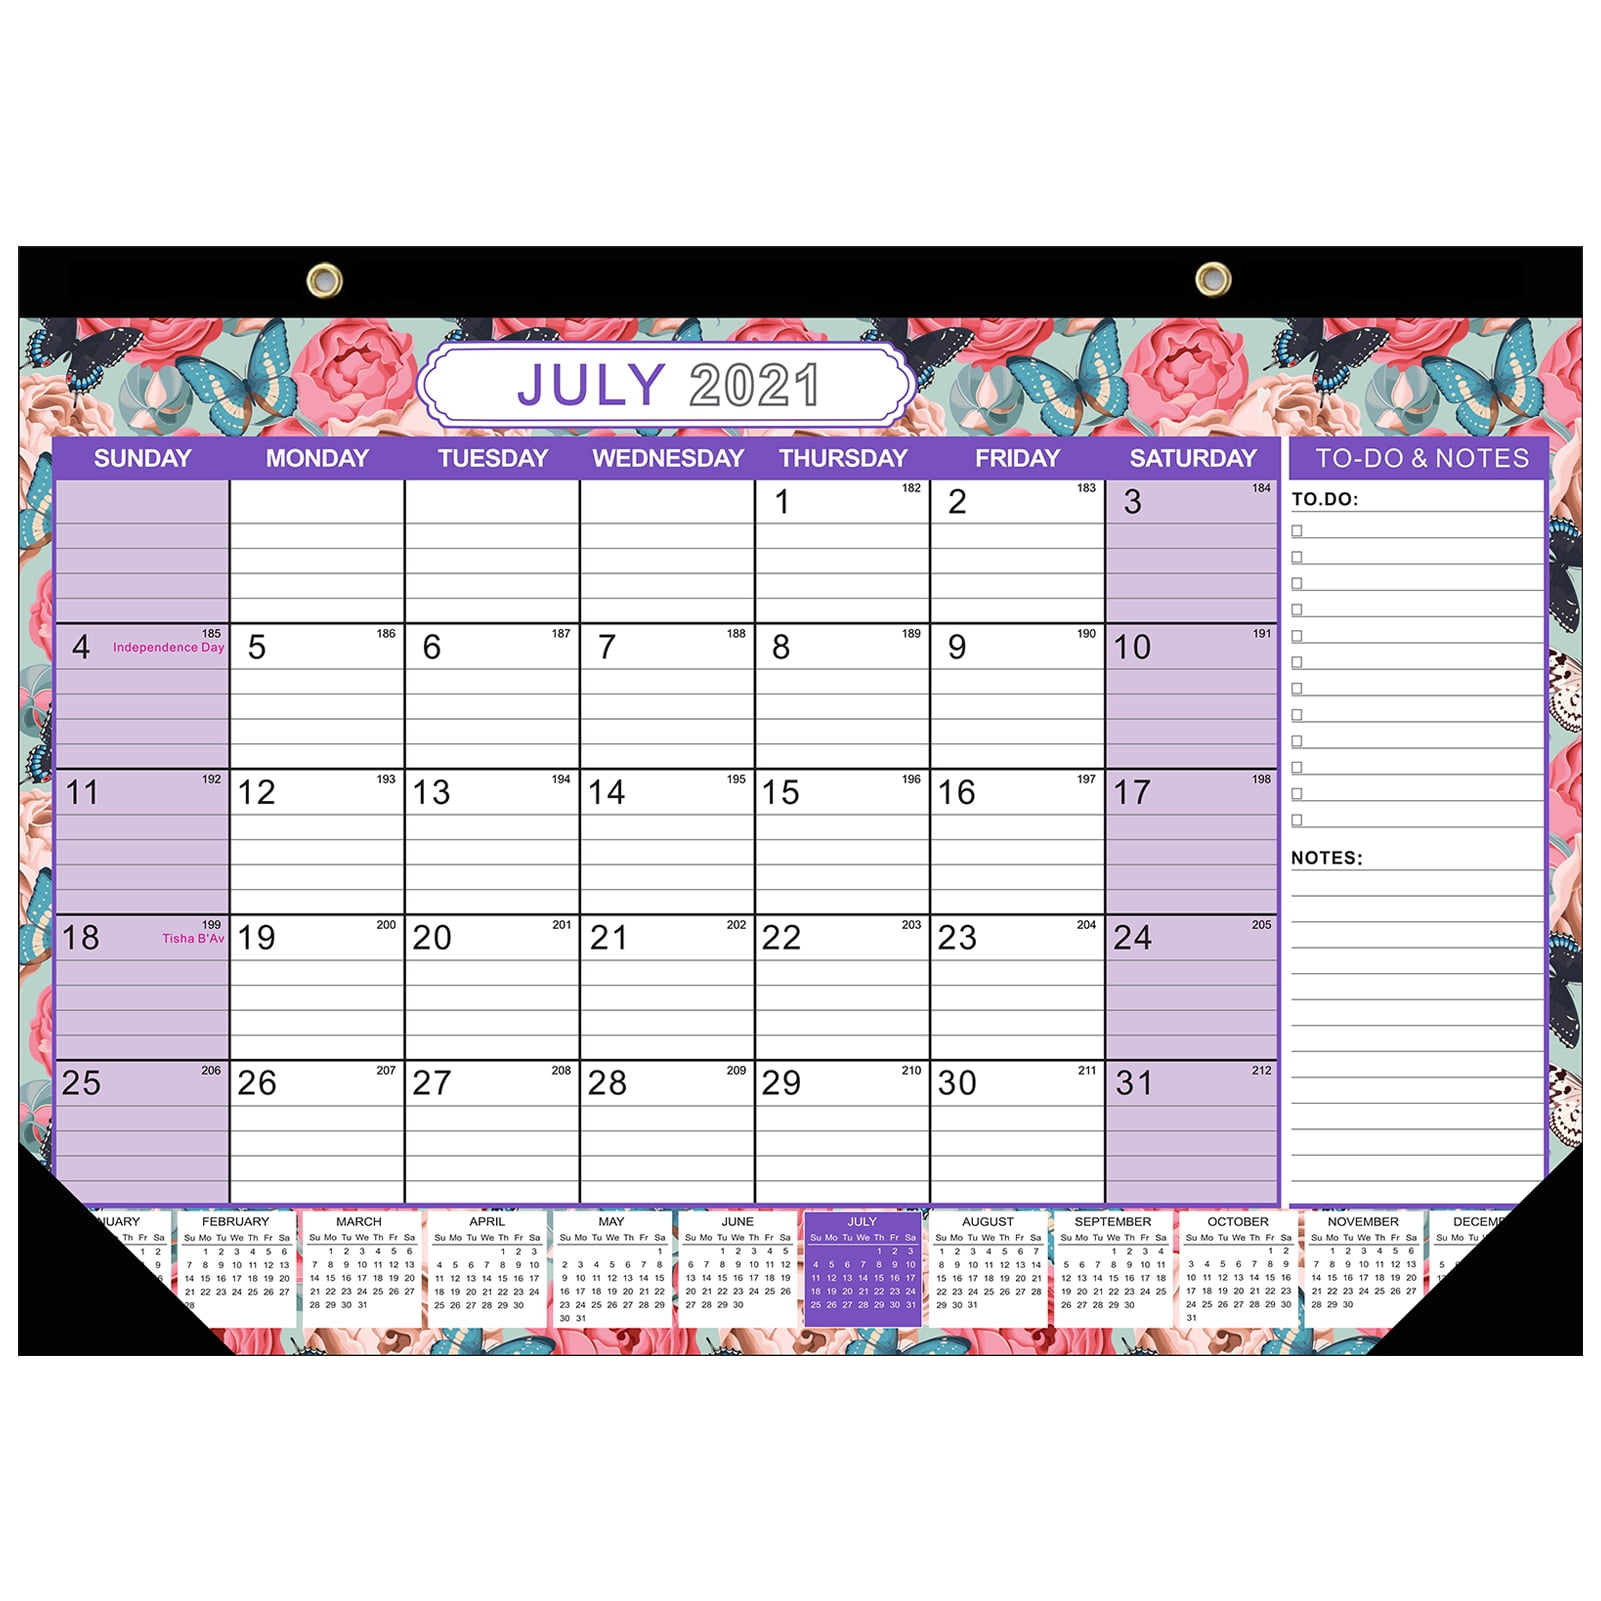 To-Do List Twin Wire Binding Perfect for Planning Your Home or Office 2022 Planner 8 x 10 Jan 2022 Dec 2022 2022 Weekly Monthly Planner 